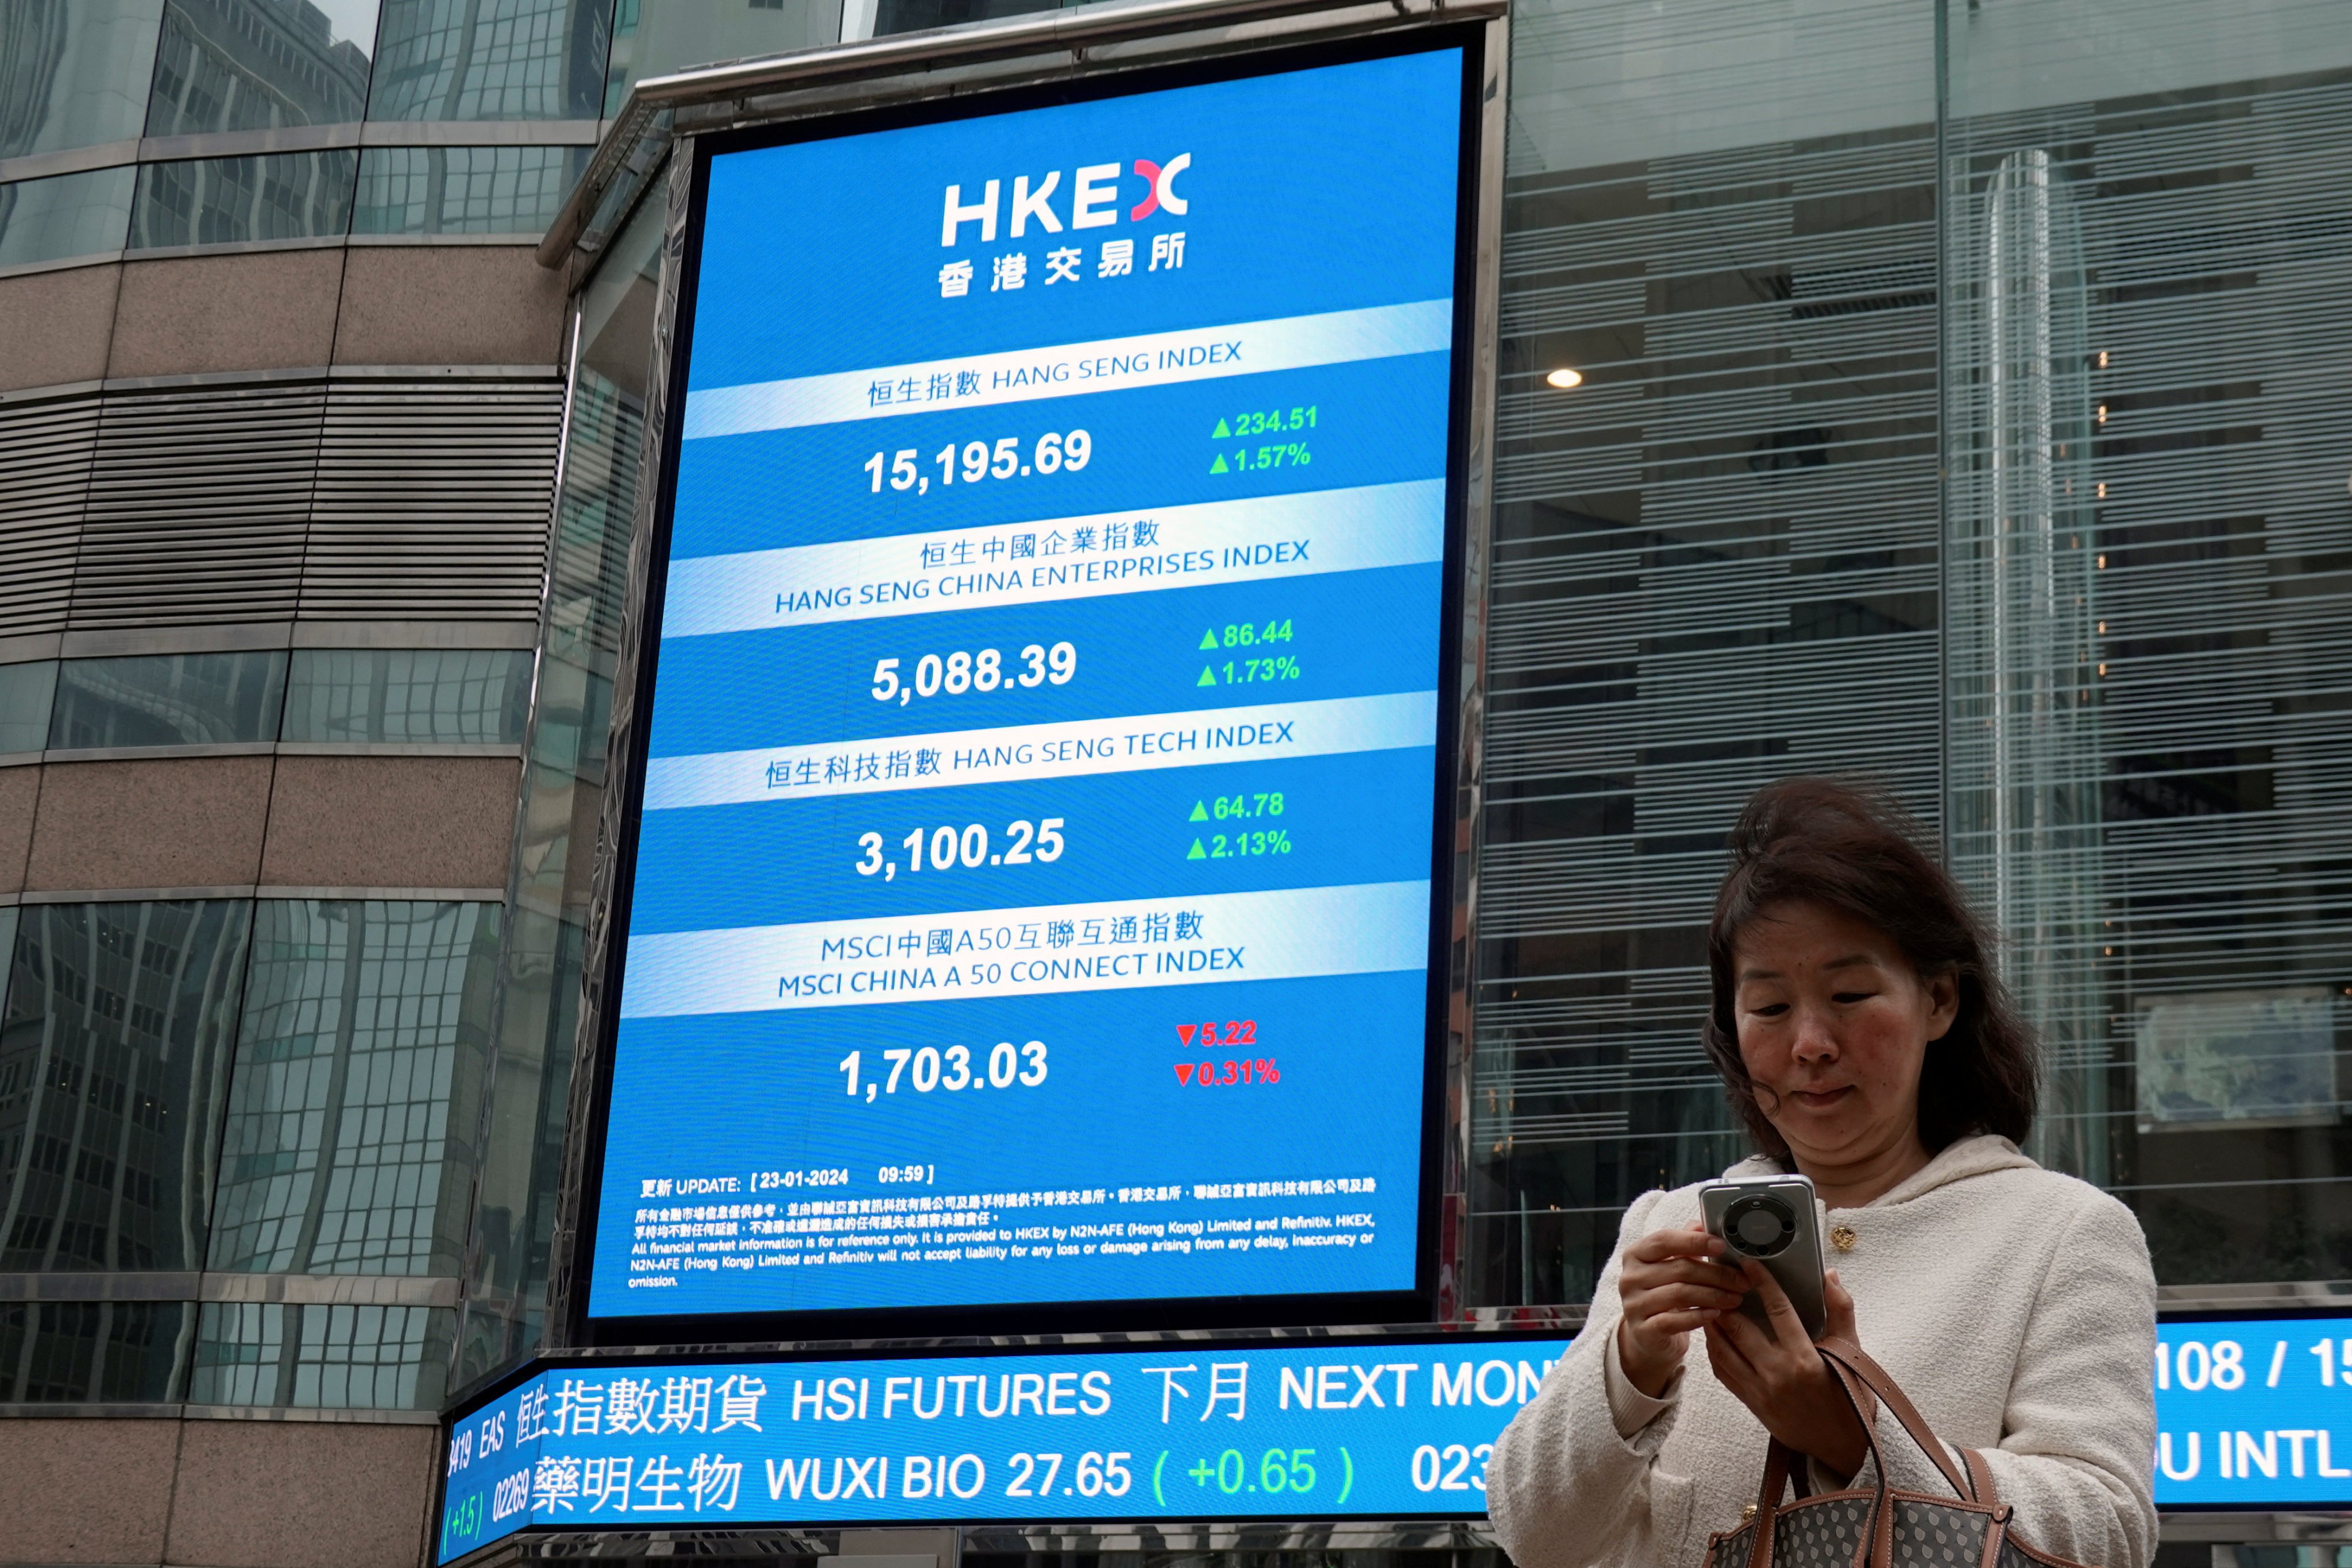 A woman checks her mobile phone near screens displaying the Hang Seng Index and stock prices outside the Exchange Square in Hong Kong on January 23. Photo: Reuters